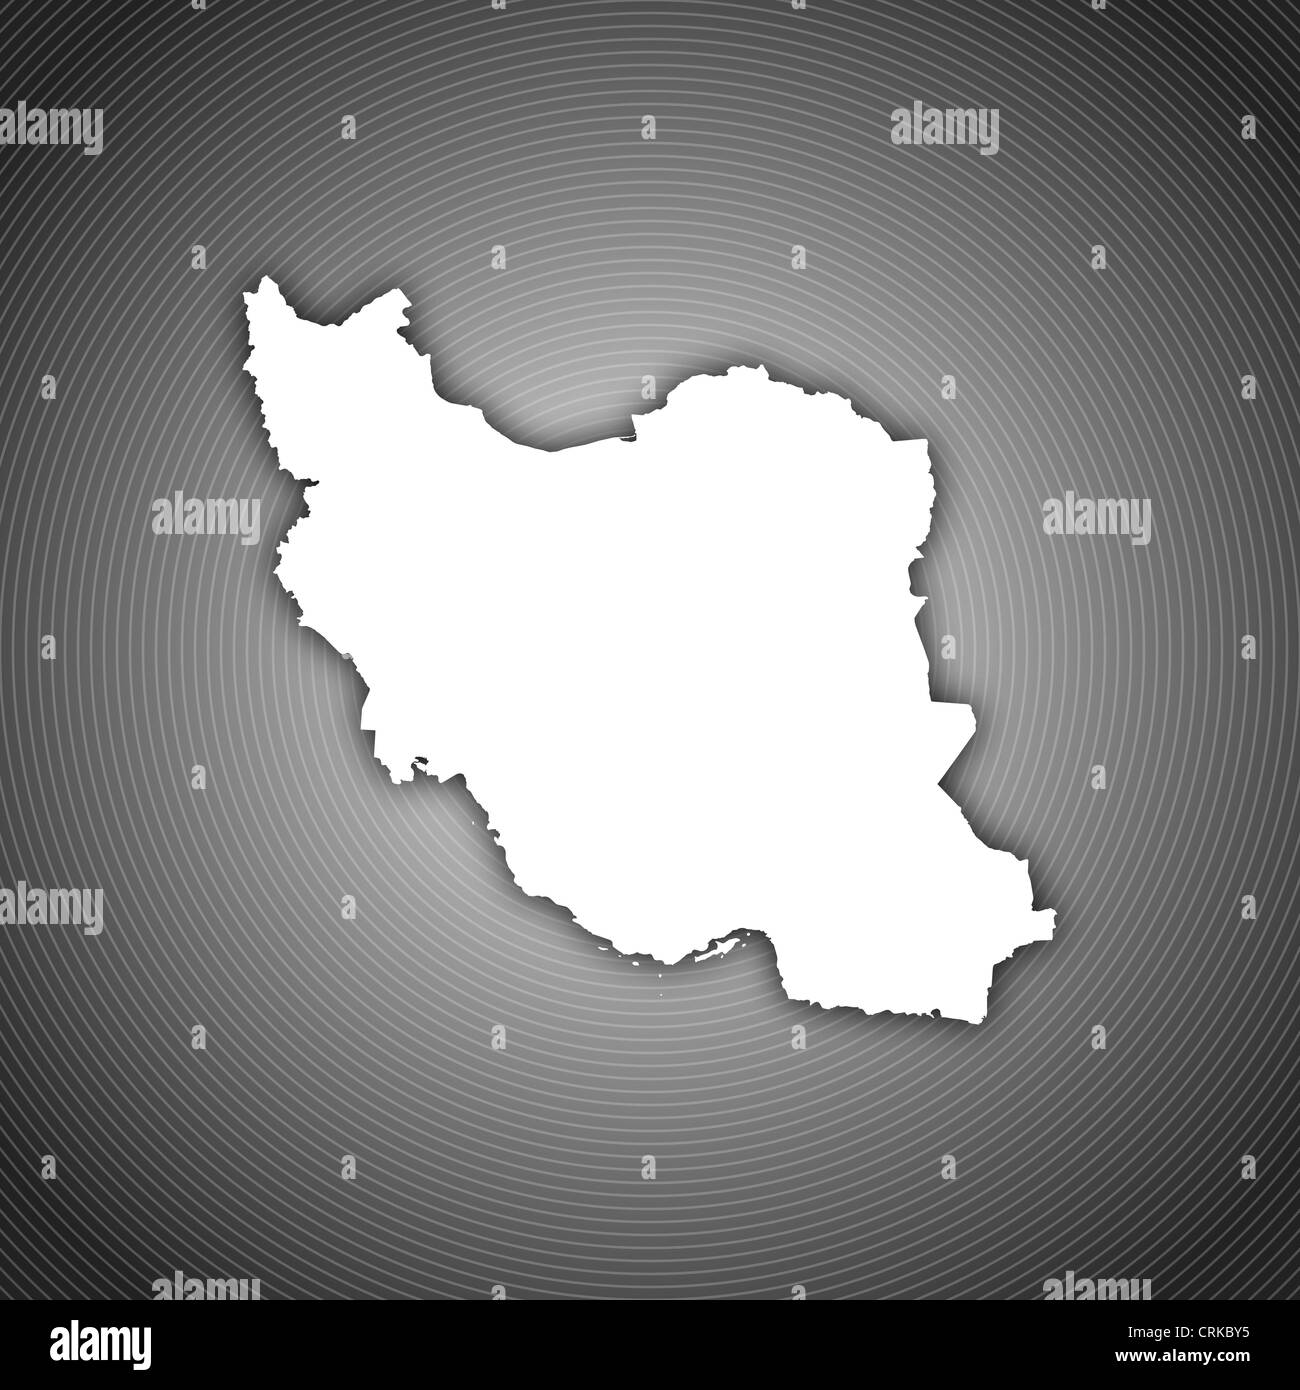 Political map of Iran with the several provinces. Stock Photo